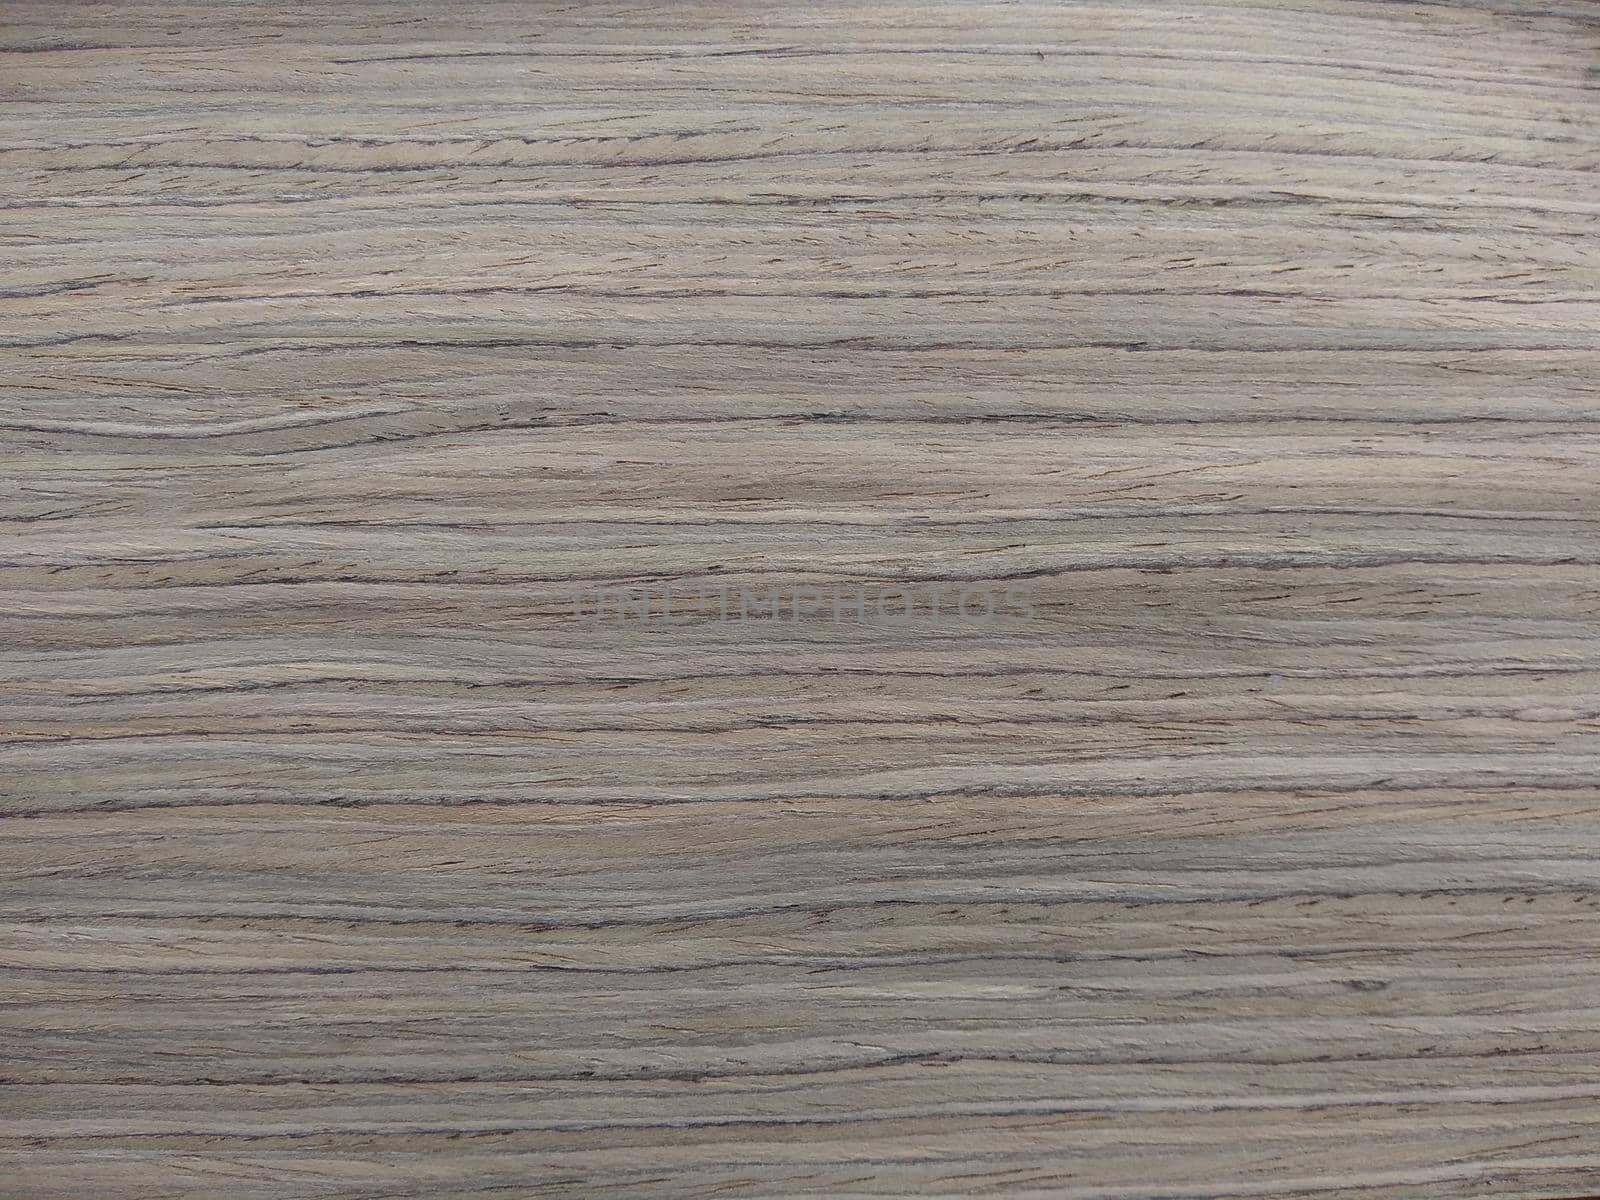 Natural gray american walnut wood texture background. veneer surface for interior and exterior manufacturers use.